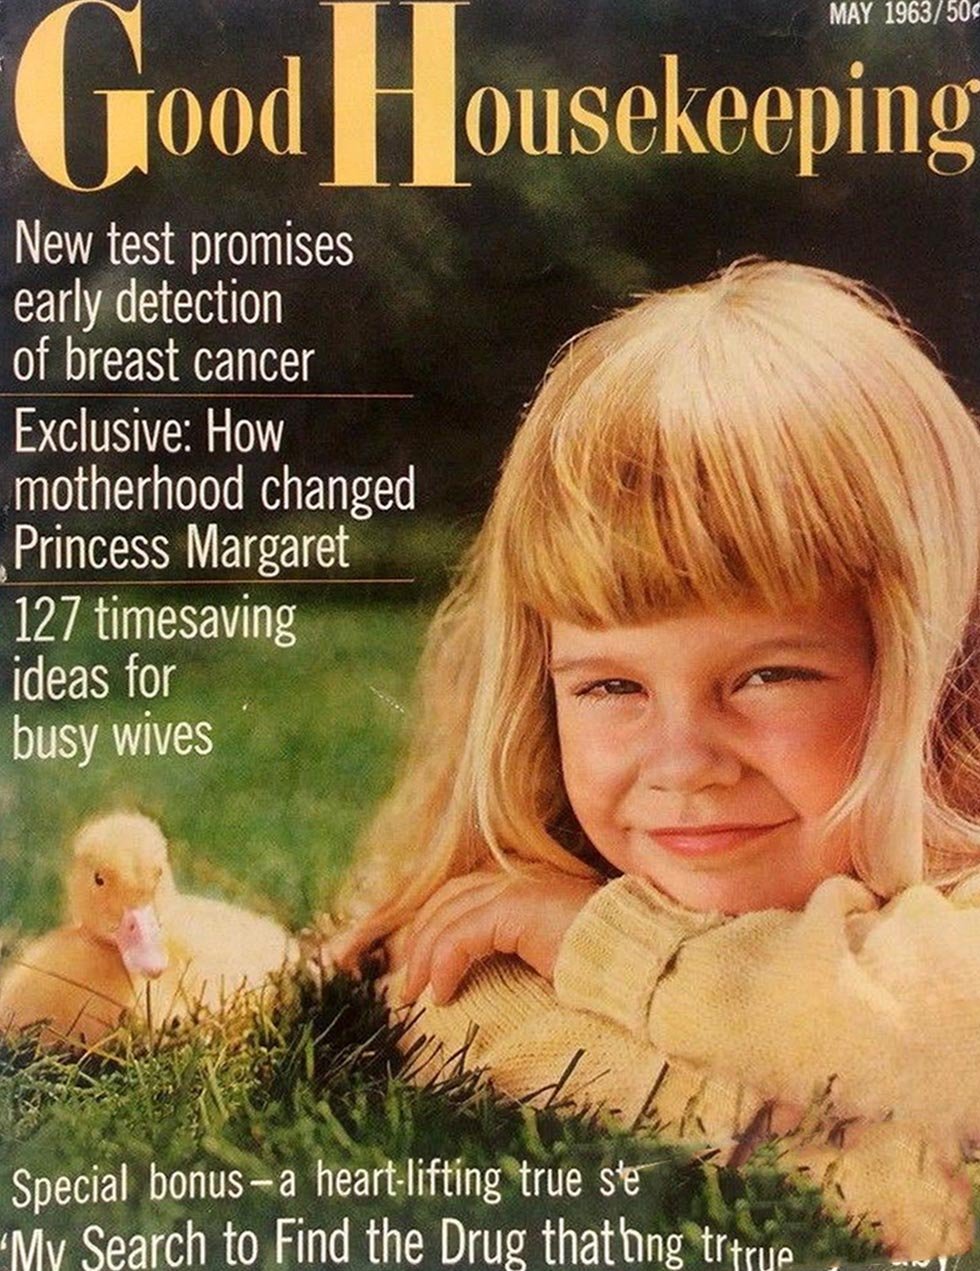 Good Housekeeping May 1963 magazine back issue Good Housekeeping magizine back copy Good Housekeeping May 1963 American womens magazine Back Issue Published by Hearst Publishing Corporation. New Test Promises Early Detection Of Breast Cancer.